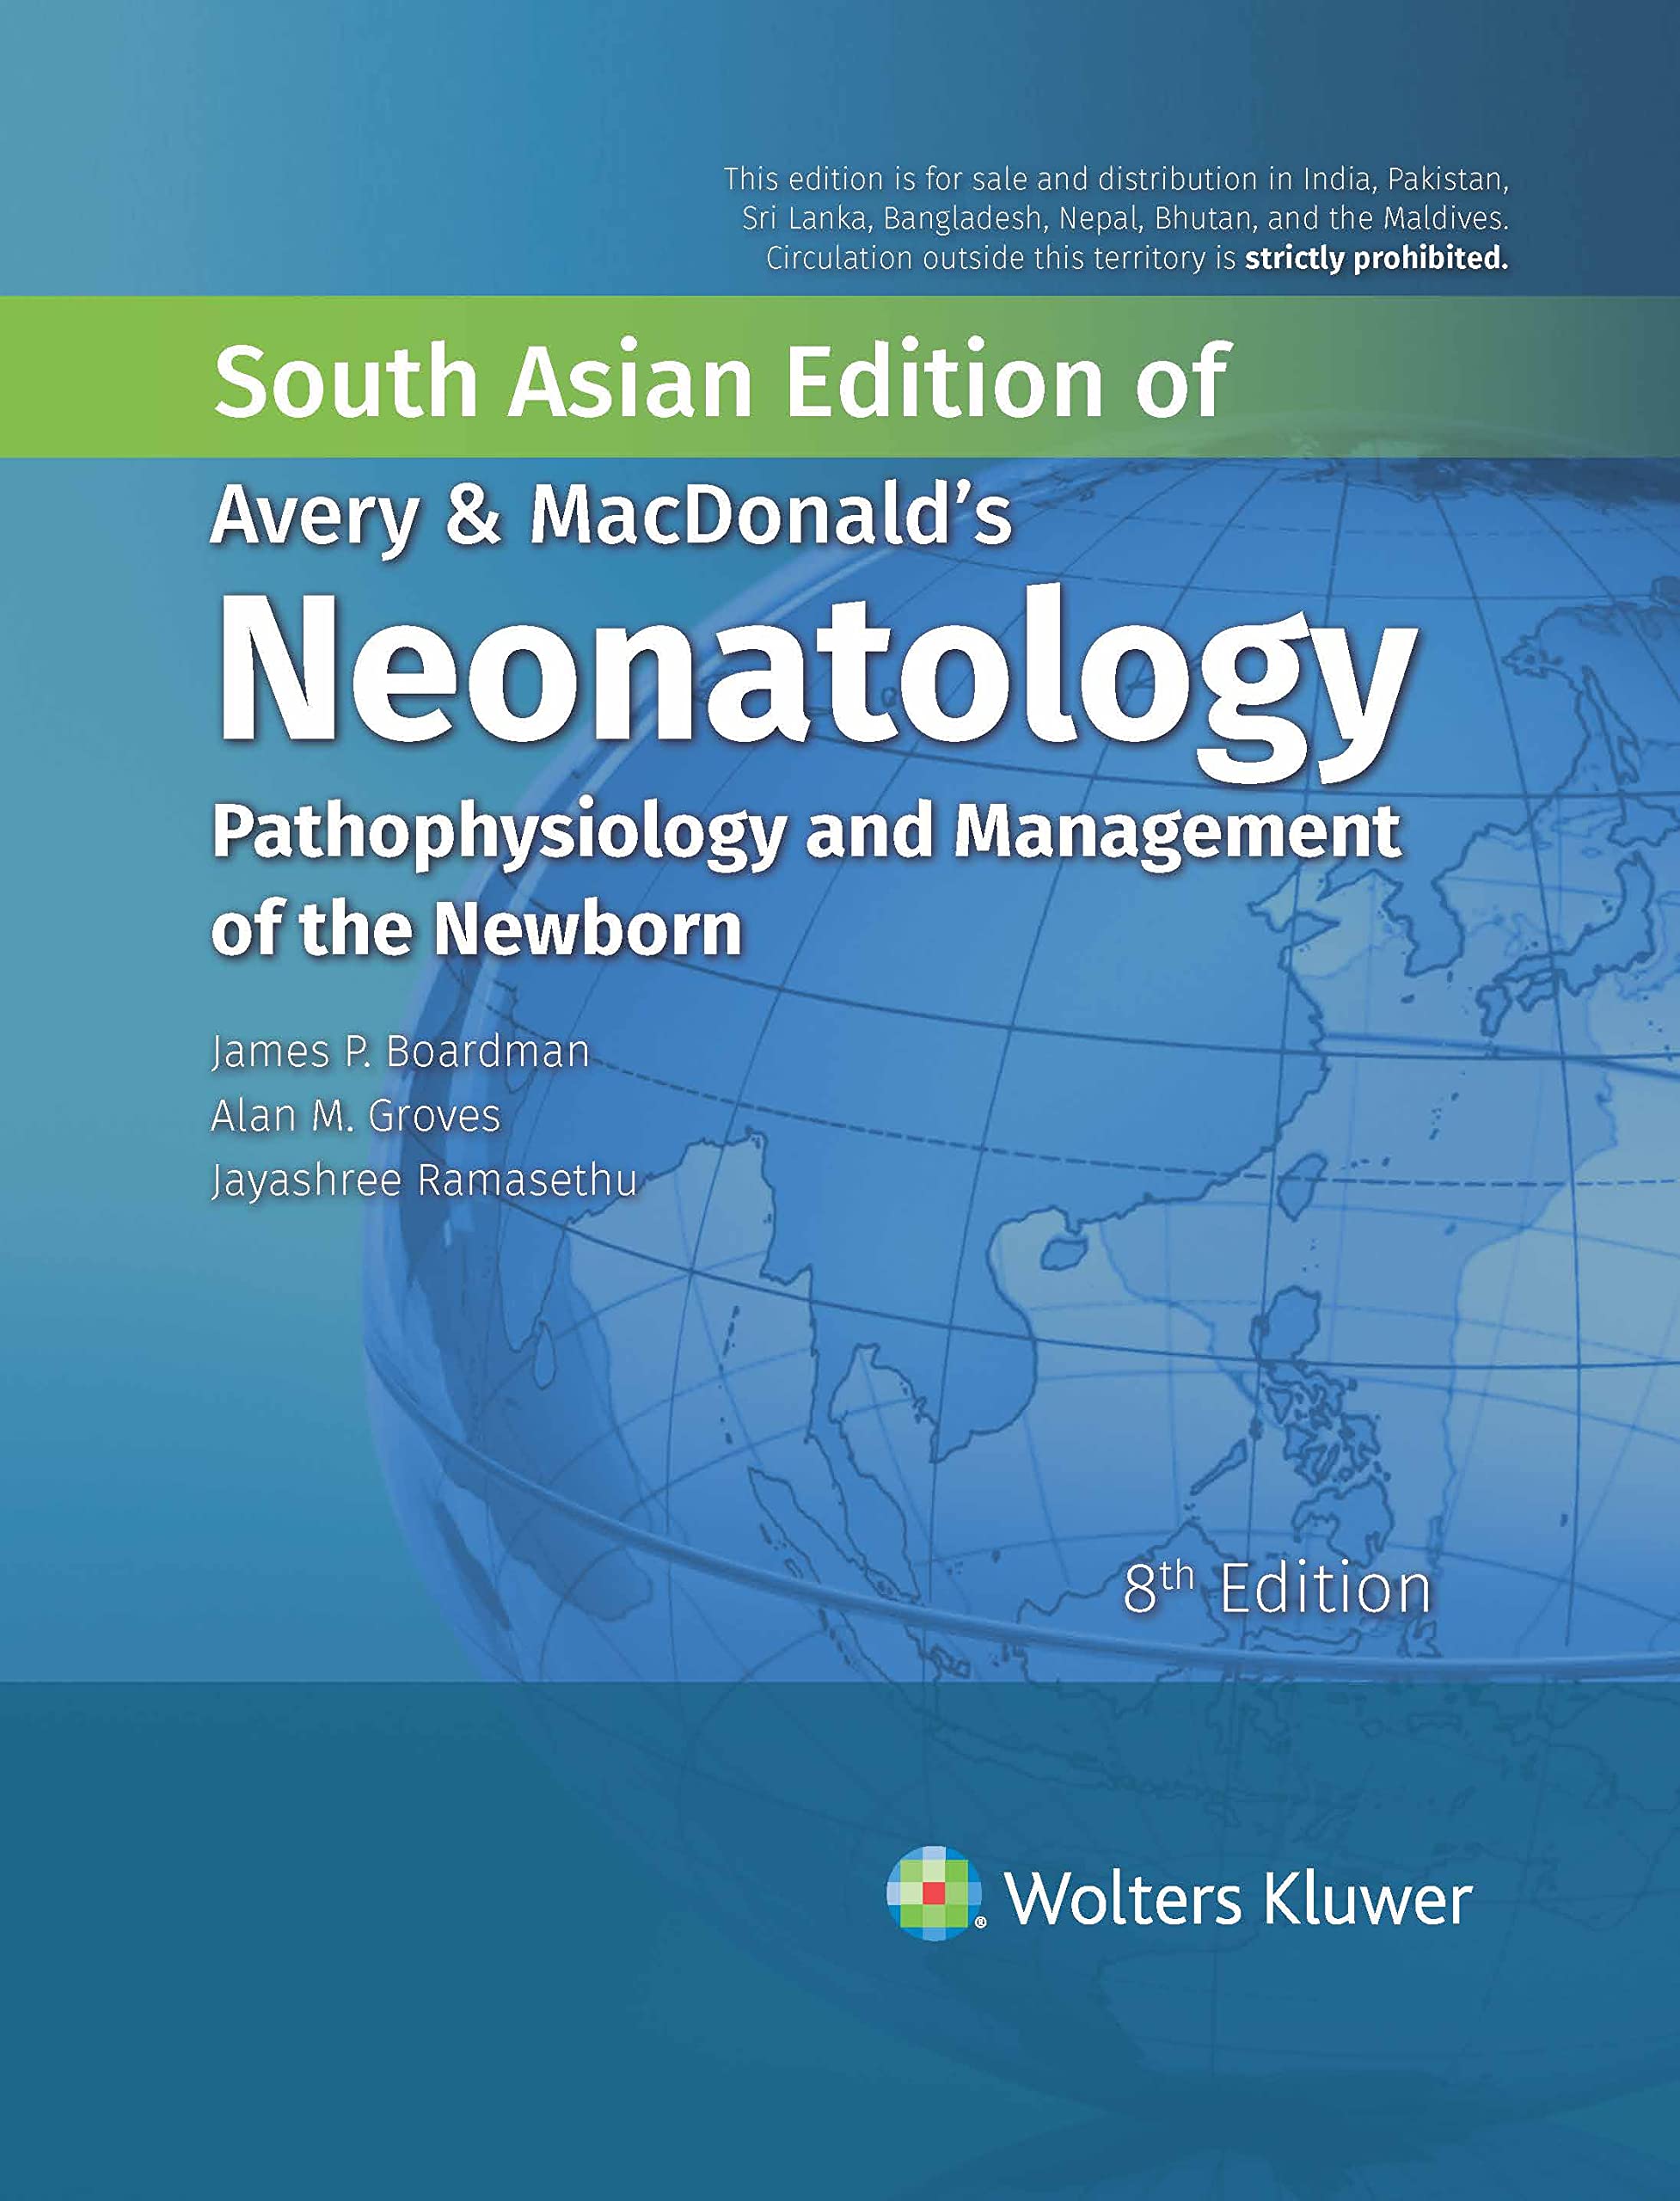 Book　Management　-AIBH　Neonatology:　Pathophysiology　8e　Avery　Exclusive,　India　and　the　MacDonald's　All　House　of　Newborn